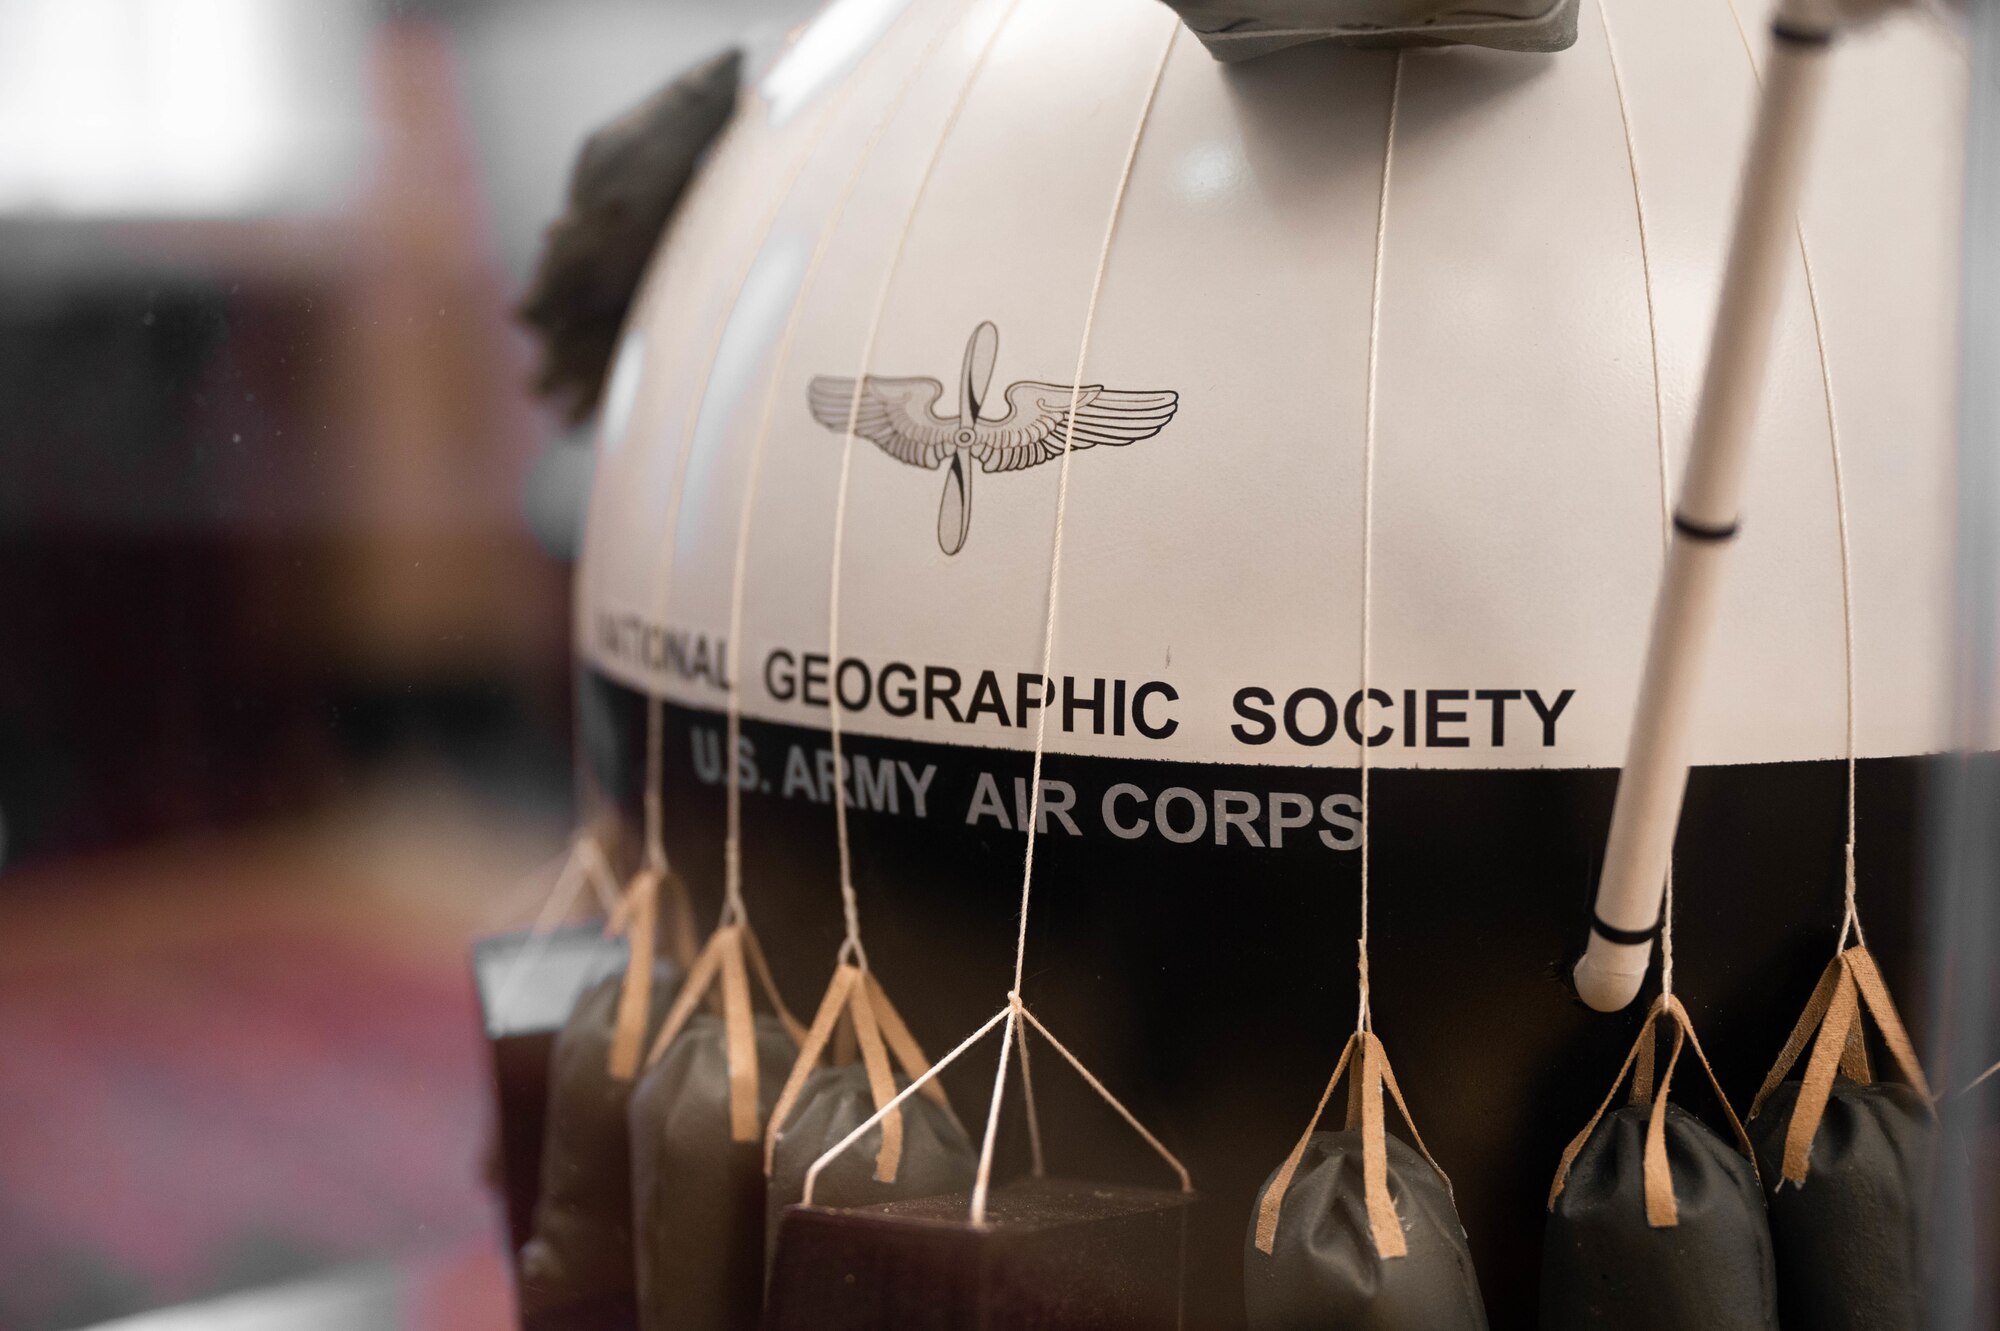 A model of the U.S. Army Air Corps Explorer II balloon sits on display at the 375th Air Mobility Wing headquarters building on March 6, 2023. Explorer II was part of a partnership between the U.S. Army Air Corps and the National Geographic Society, and its mission was to collect data on the composition of the atmosphere. (U.S. Air Force photo by Airman 1st Class De’Quan Simmons)